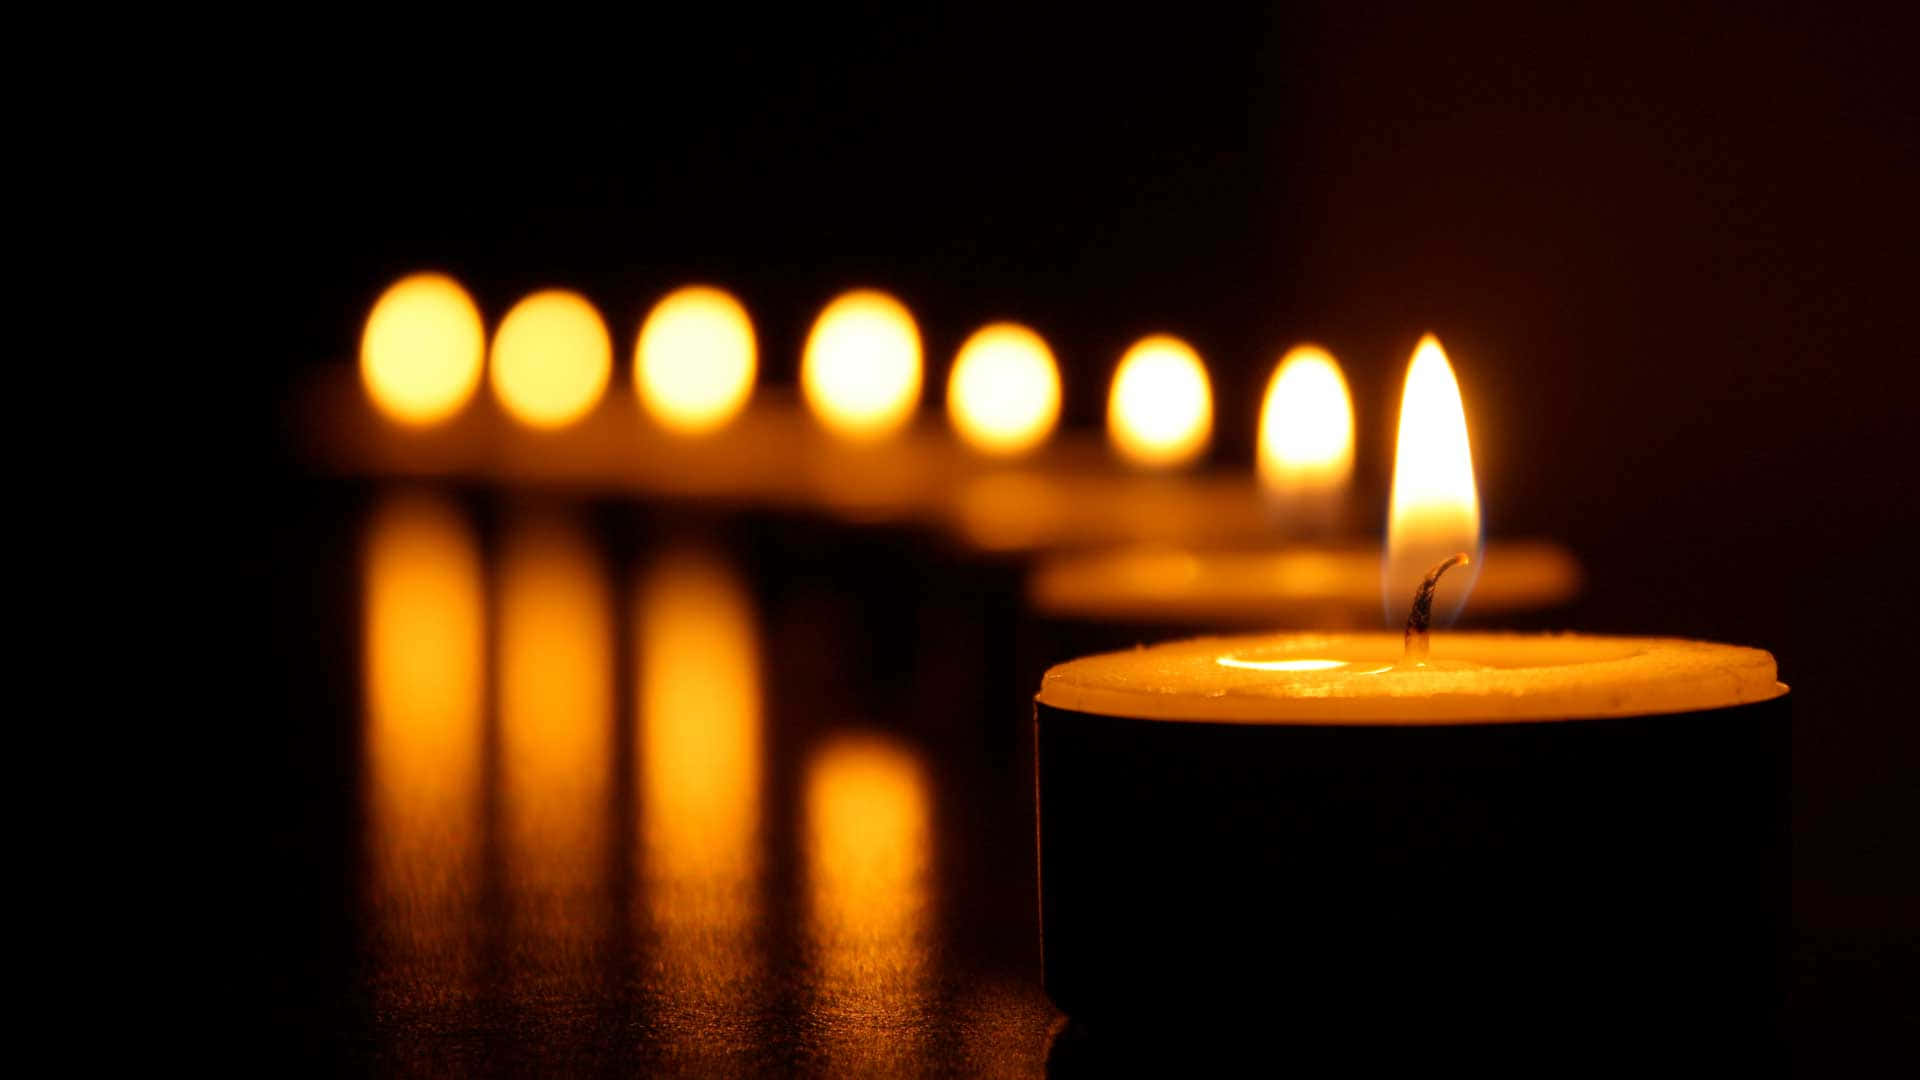 "candles Of Remembrance On All Souls' Day" Wallpaper